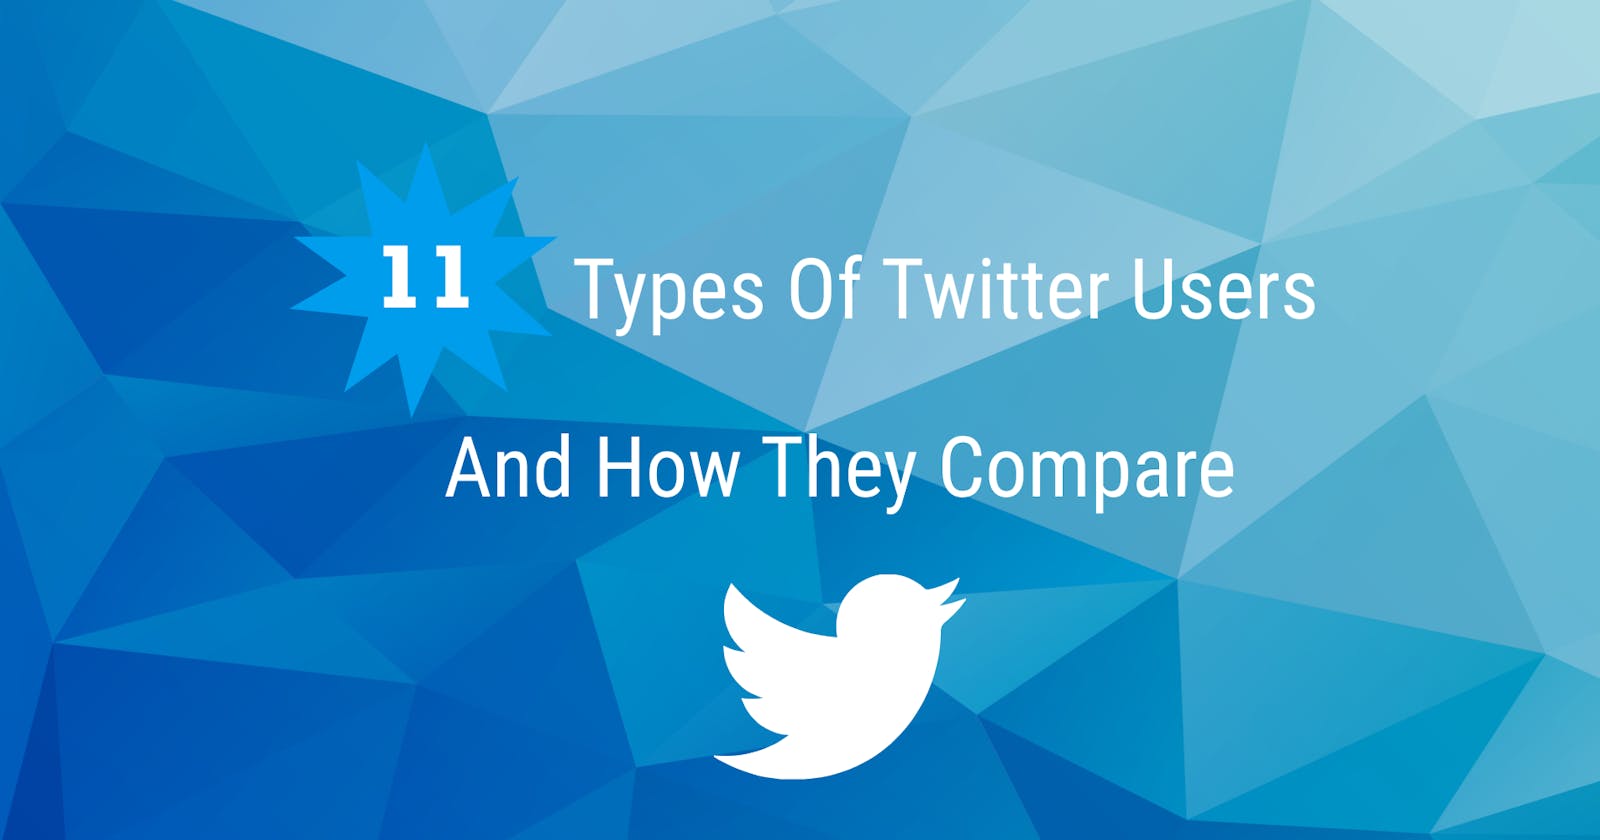 11 Types of Twitter Users and How They Compare